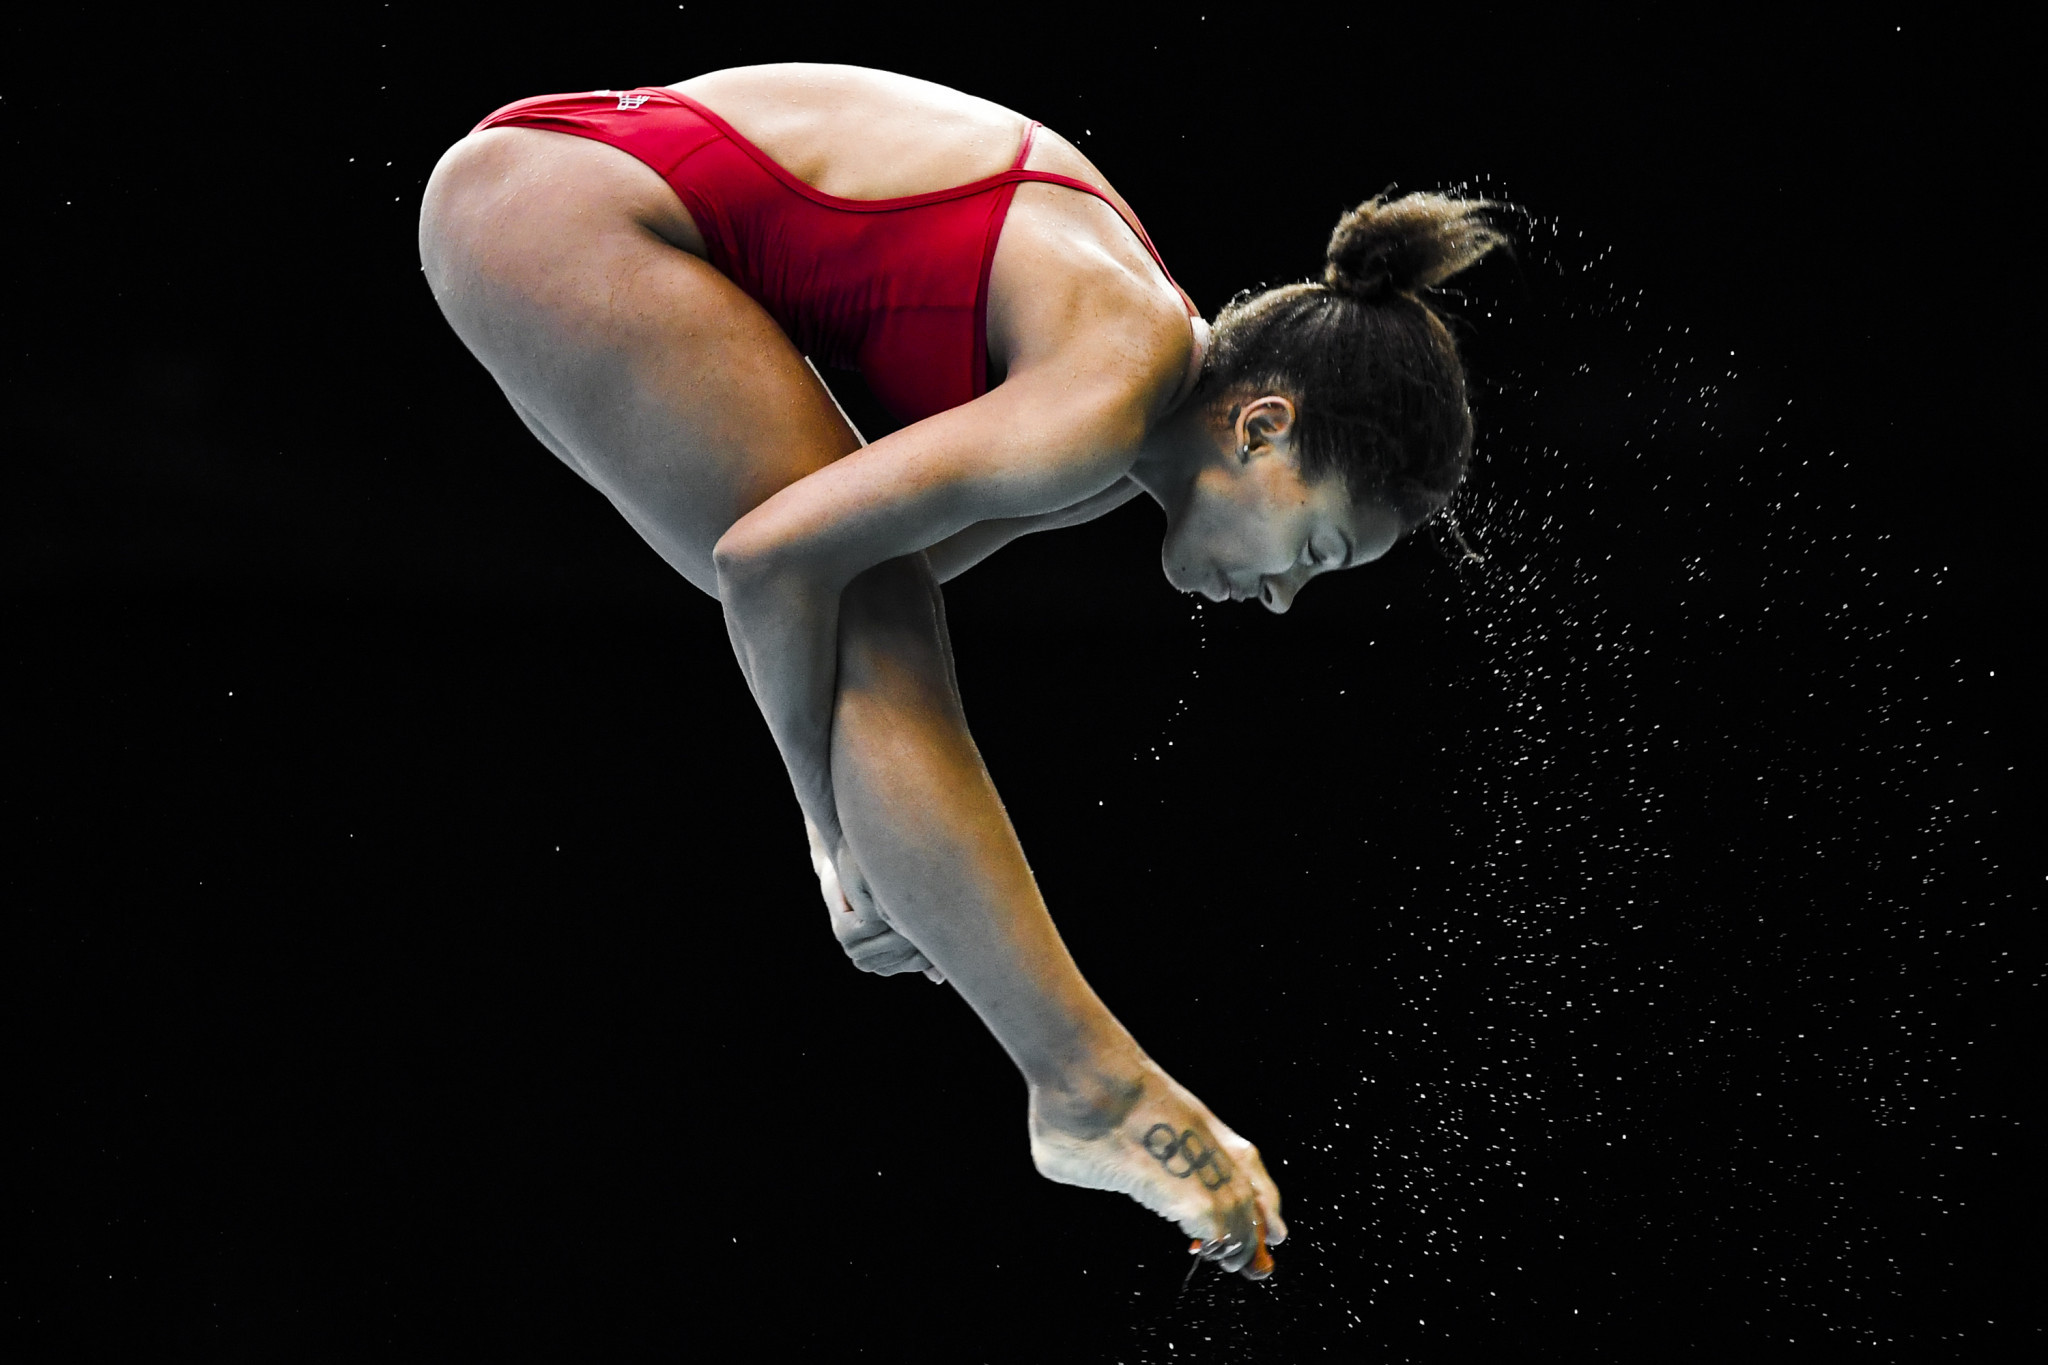 Jennifer Abel eased through to the springboard final at the FINA Diving Grand Prix in Calgary ©Getty Images